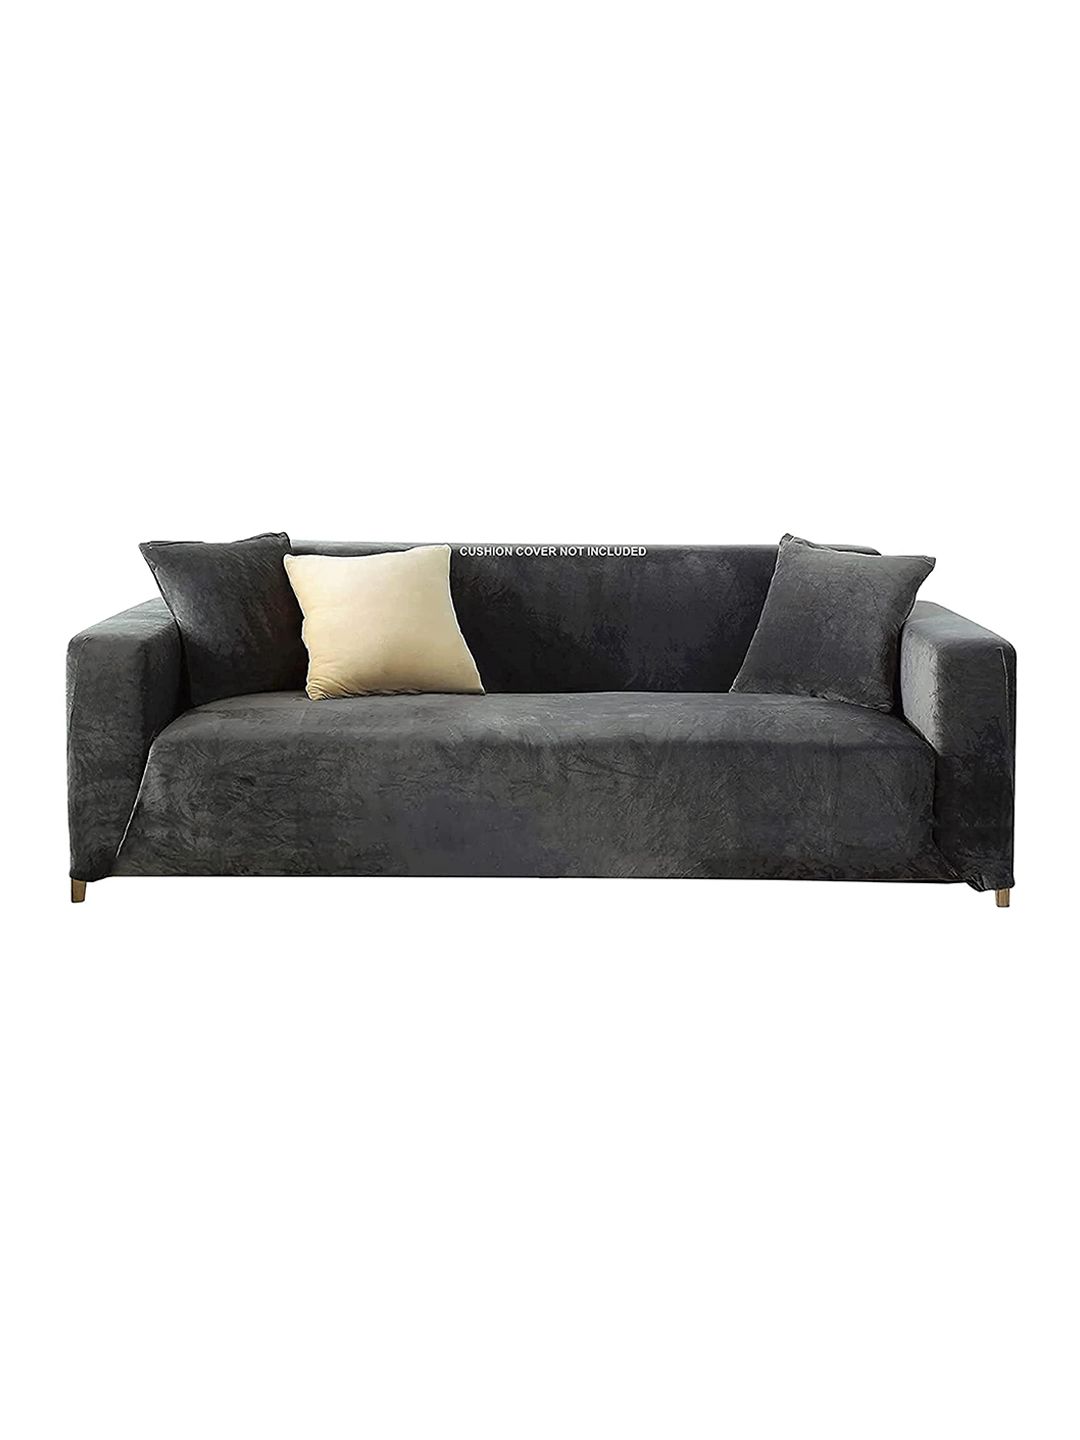 HOUSE OF QUIRK Grey Solid Sofa Cover Price in India